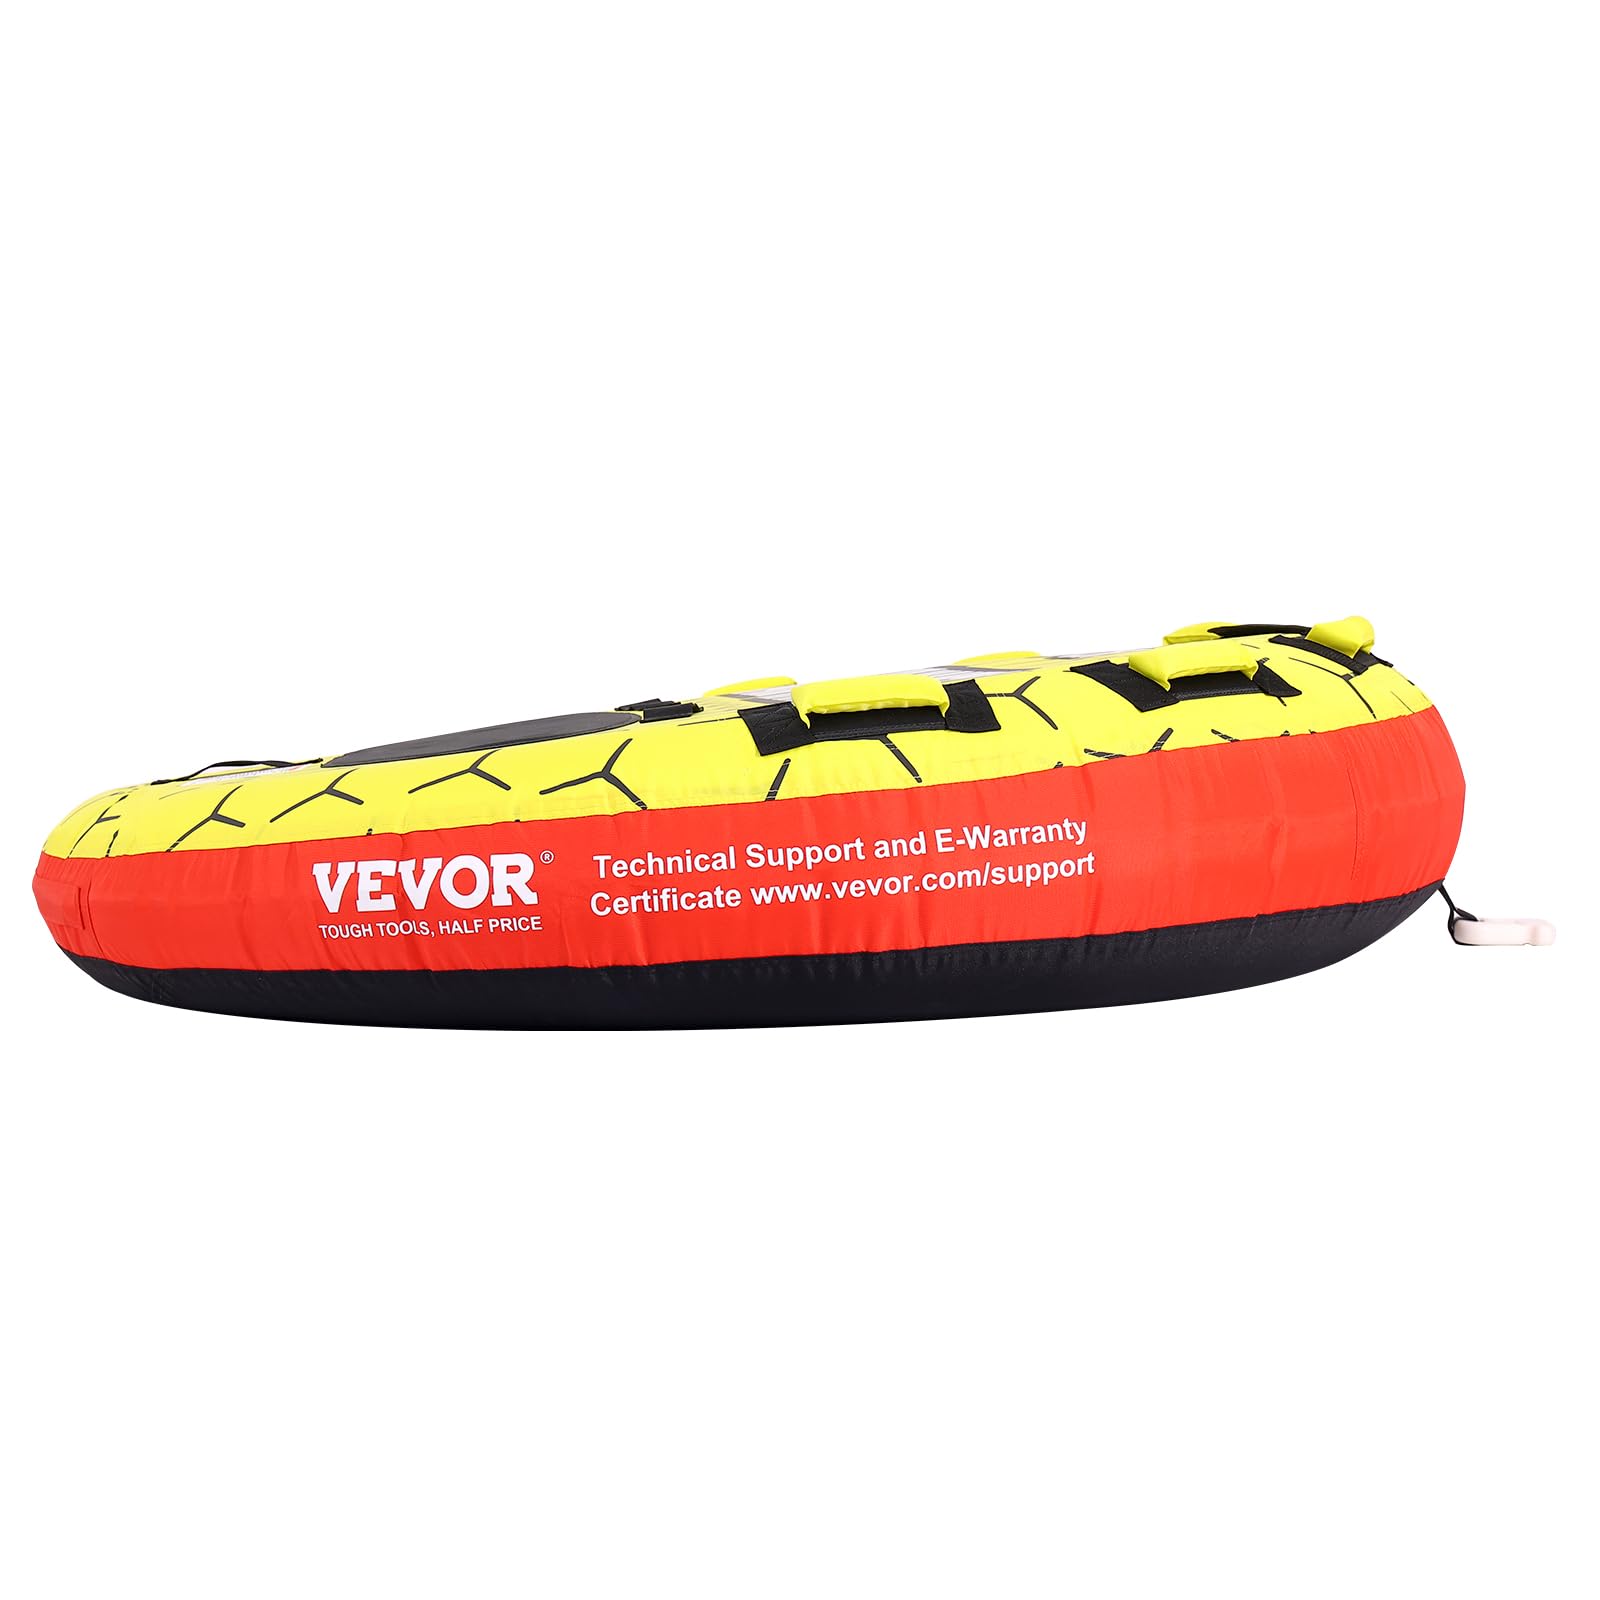 VEVOR Towable Tube for Boating, 1-3 Riders Inflatable Boat Tubes and Towables, 510 lbs, 63